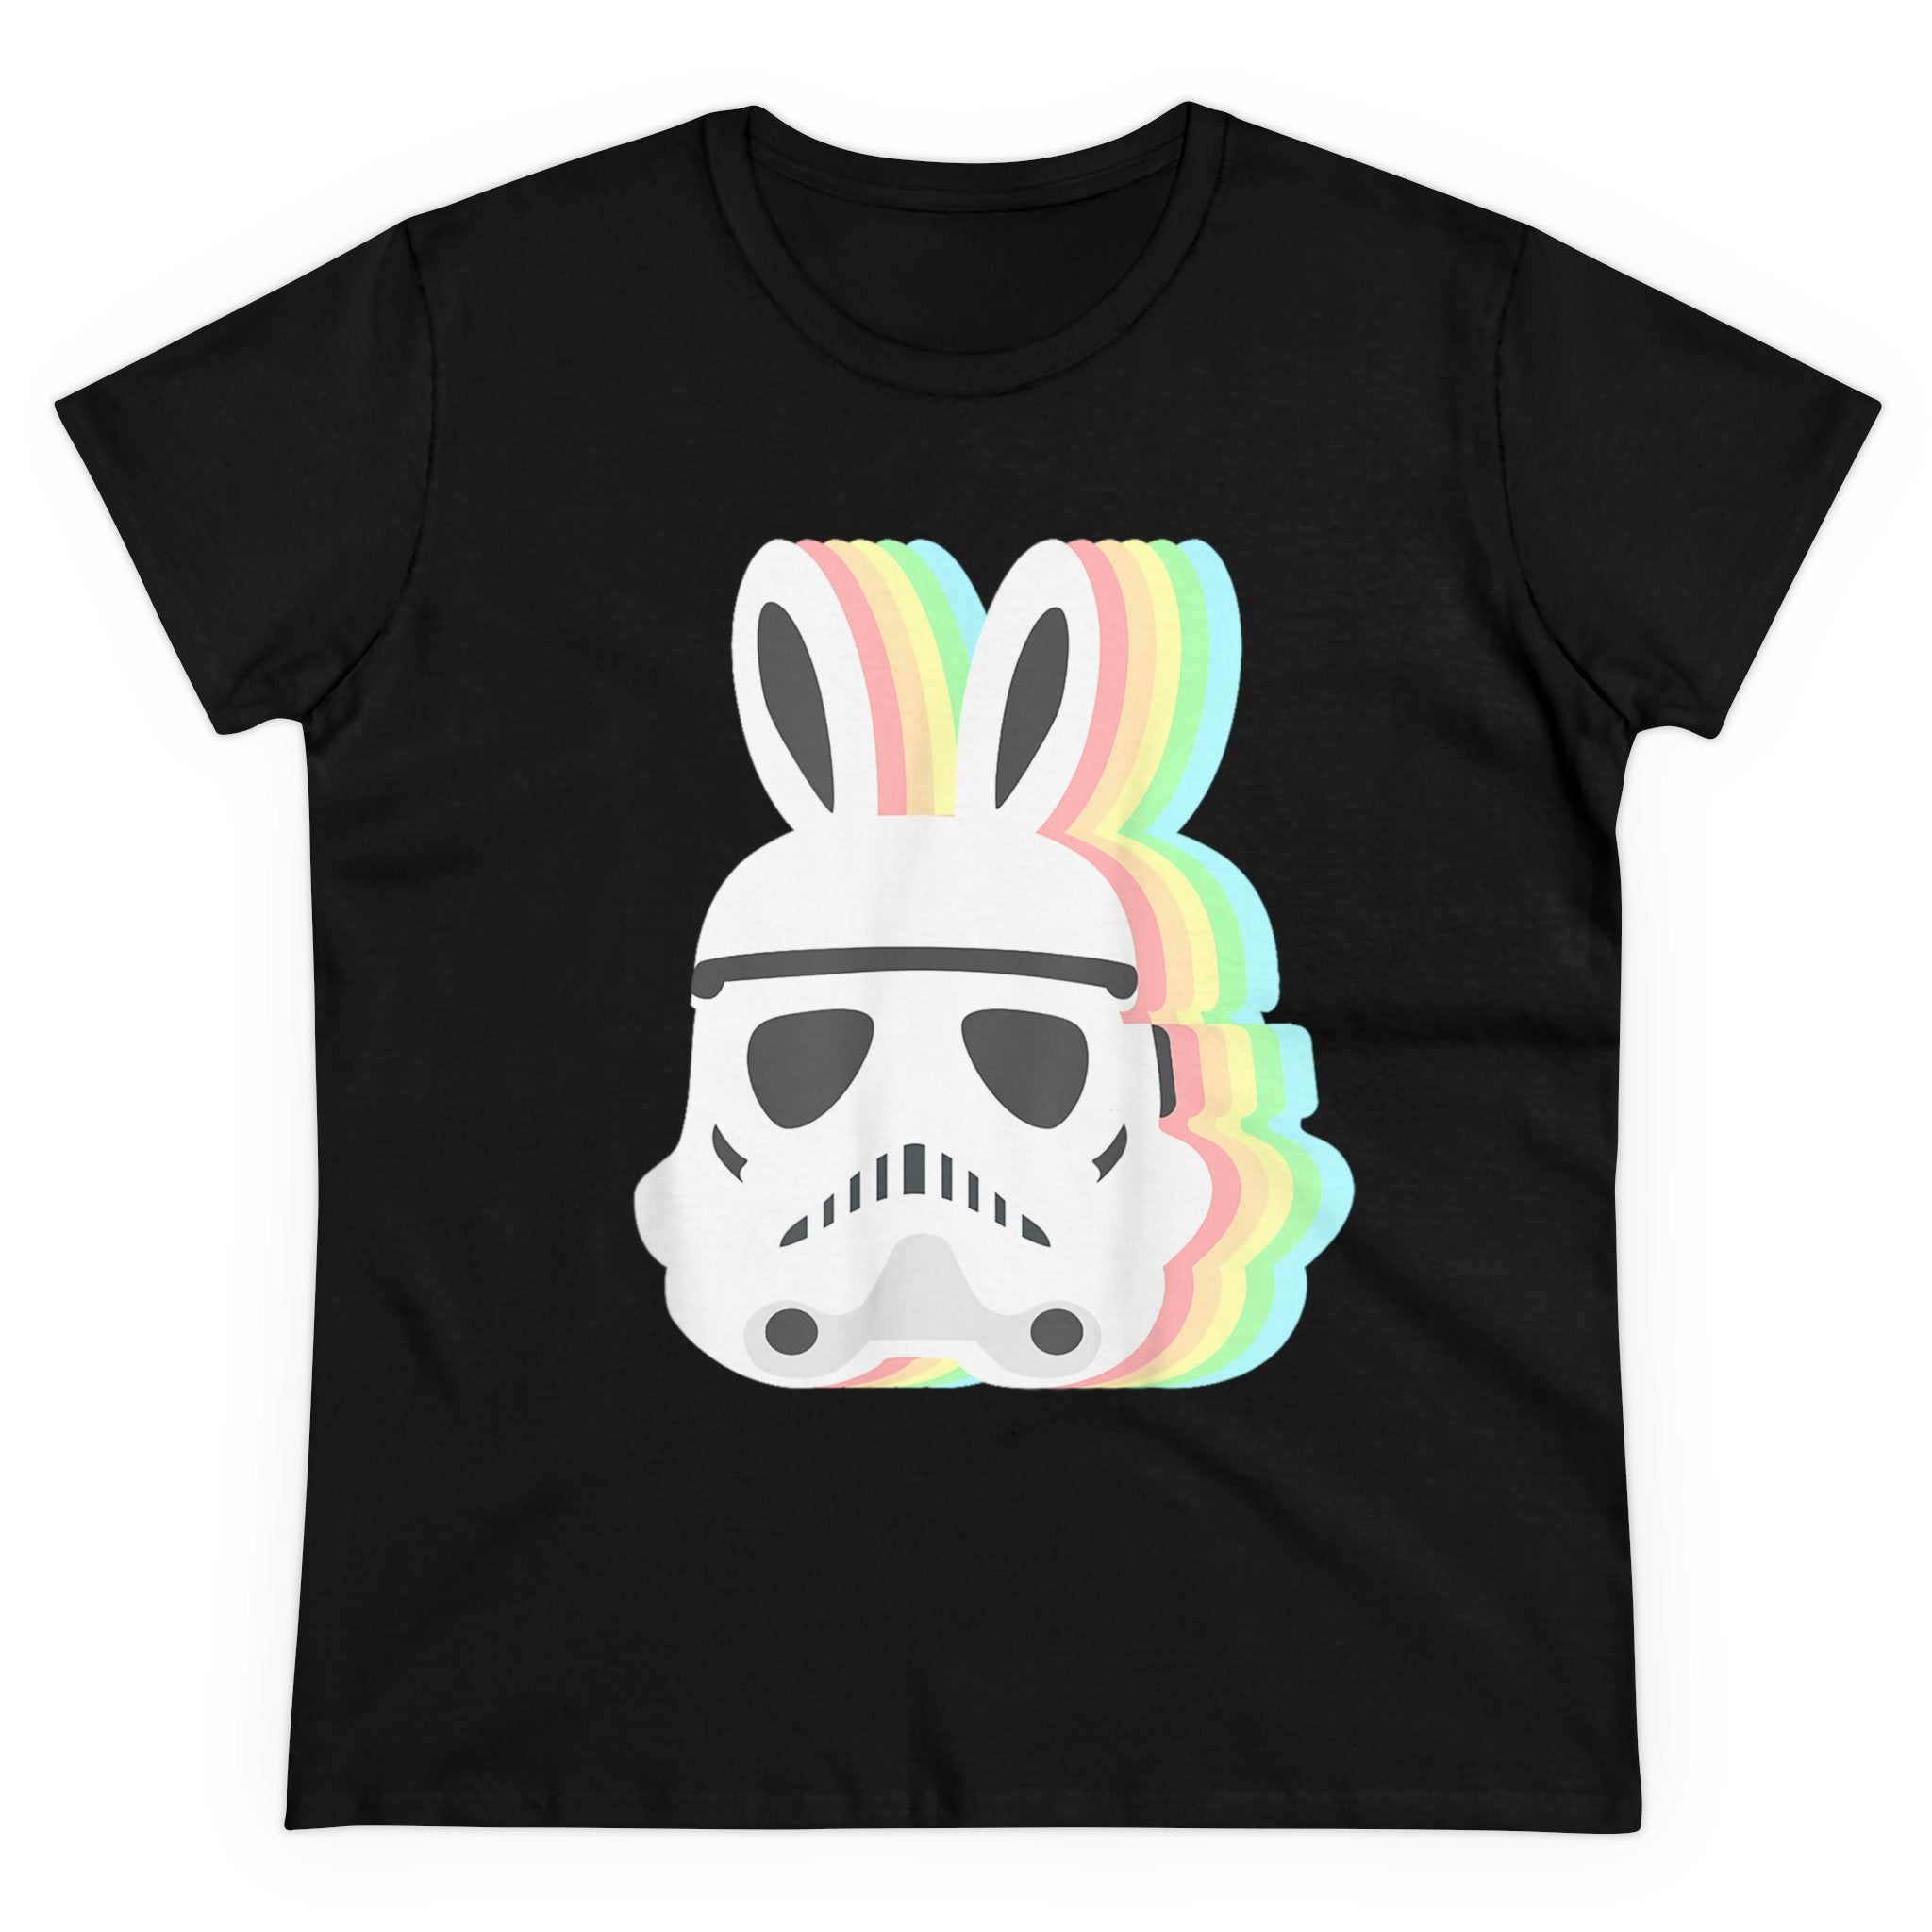 A Star Wars Easter Stormtrooper - Women's Tee in black features a graphic of an Easter Stormtrooper helmet with protruding bunny ears, set against a multicolored, layered background effect.